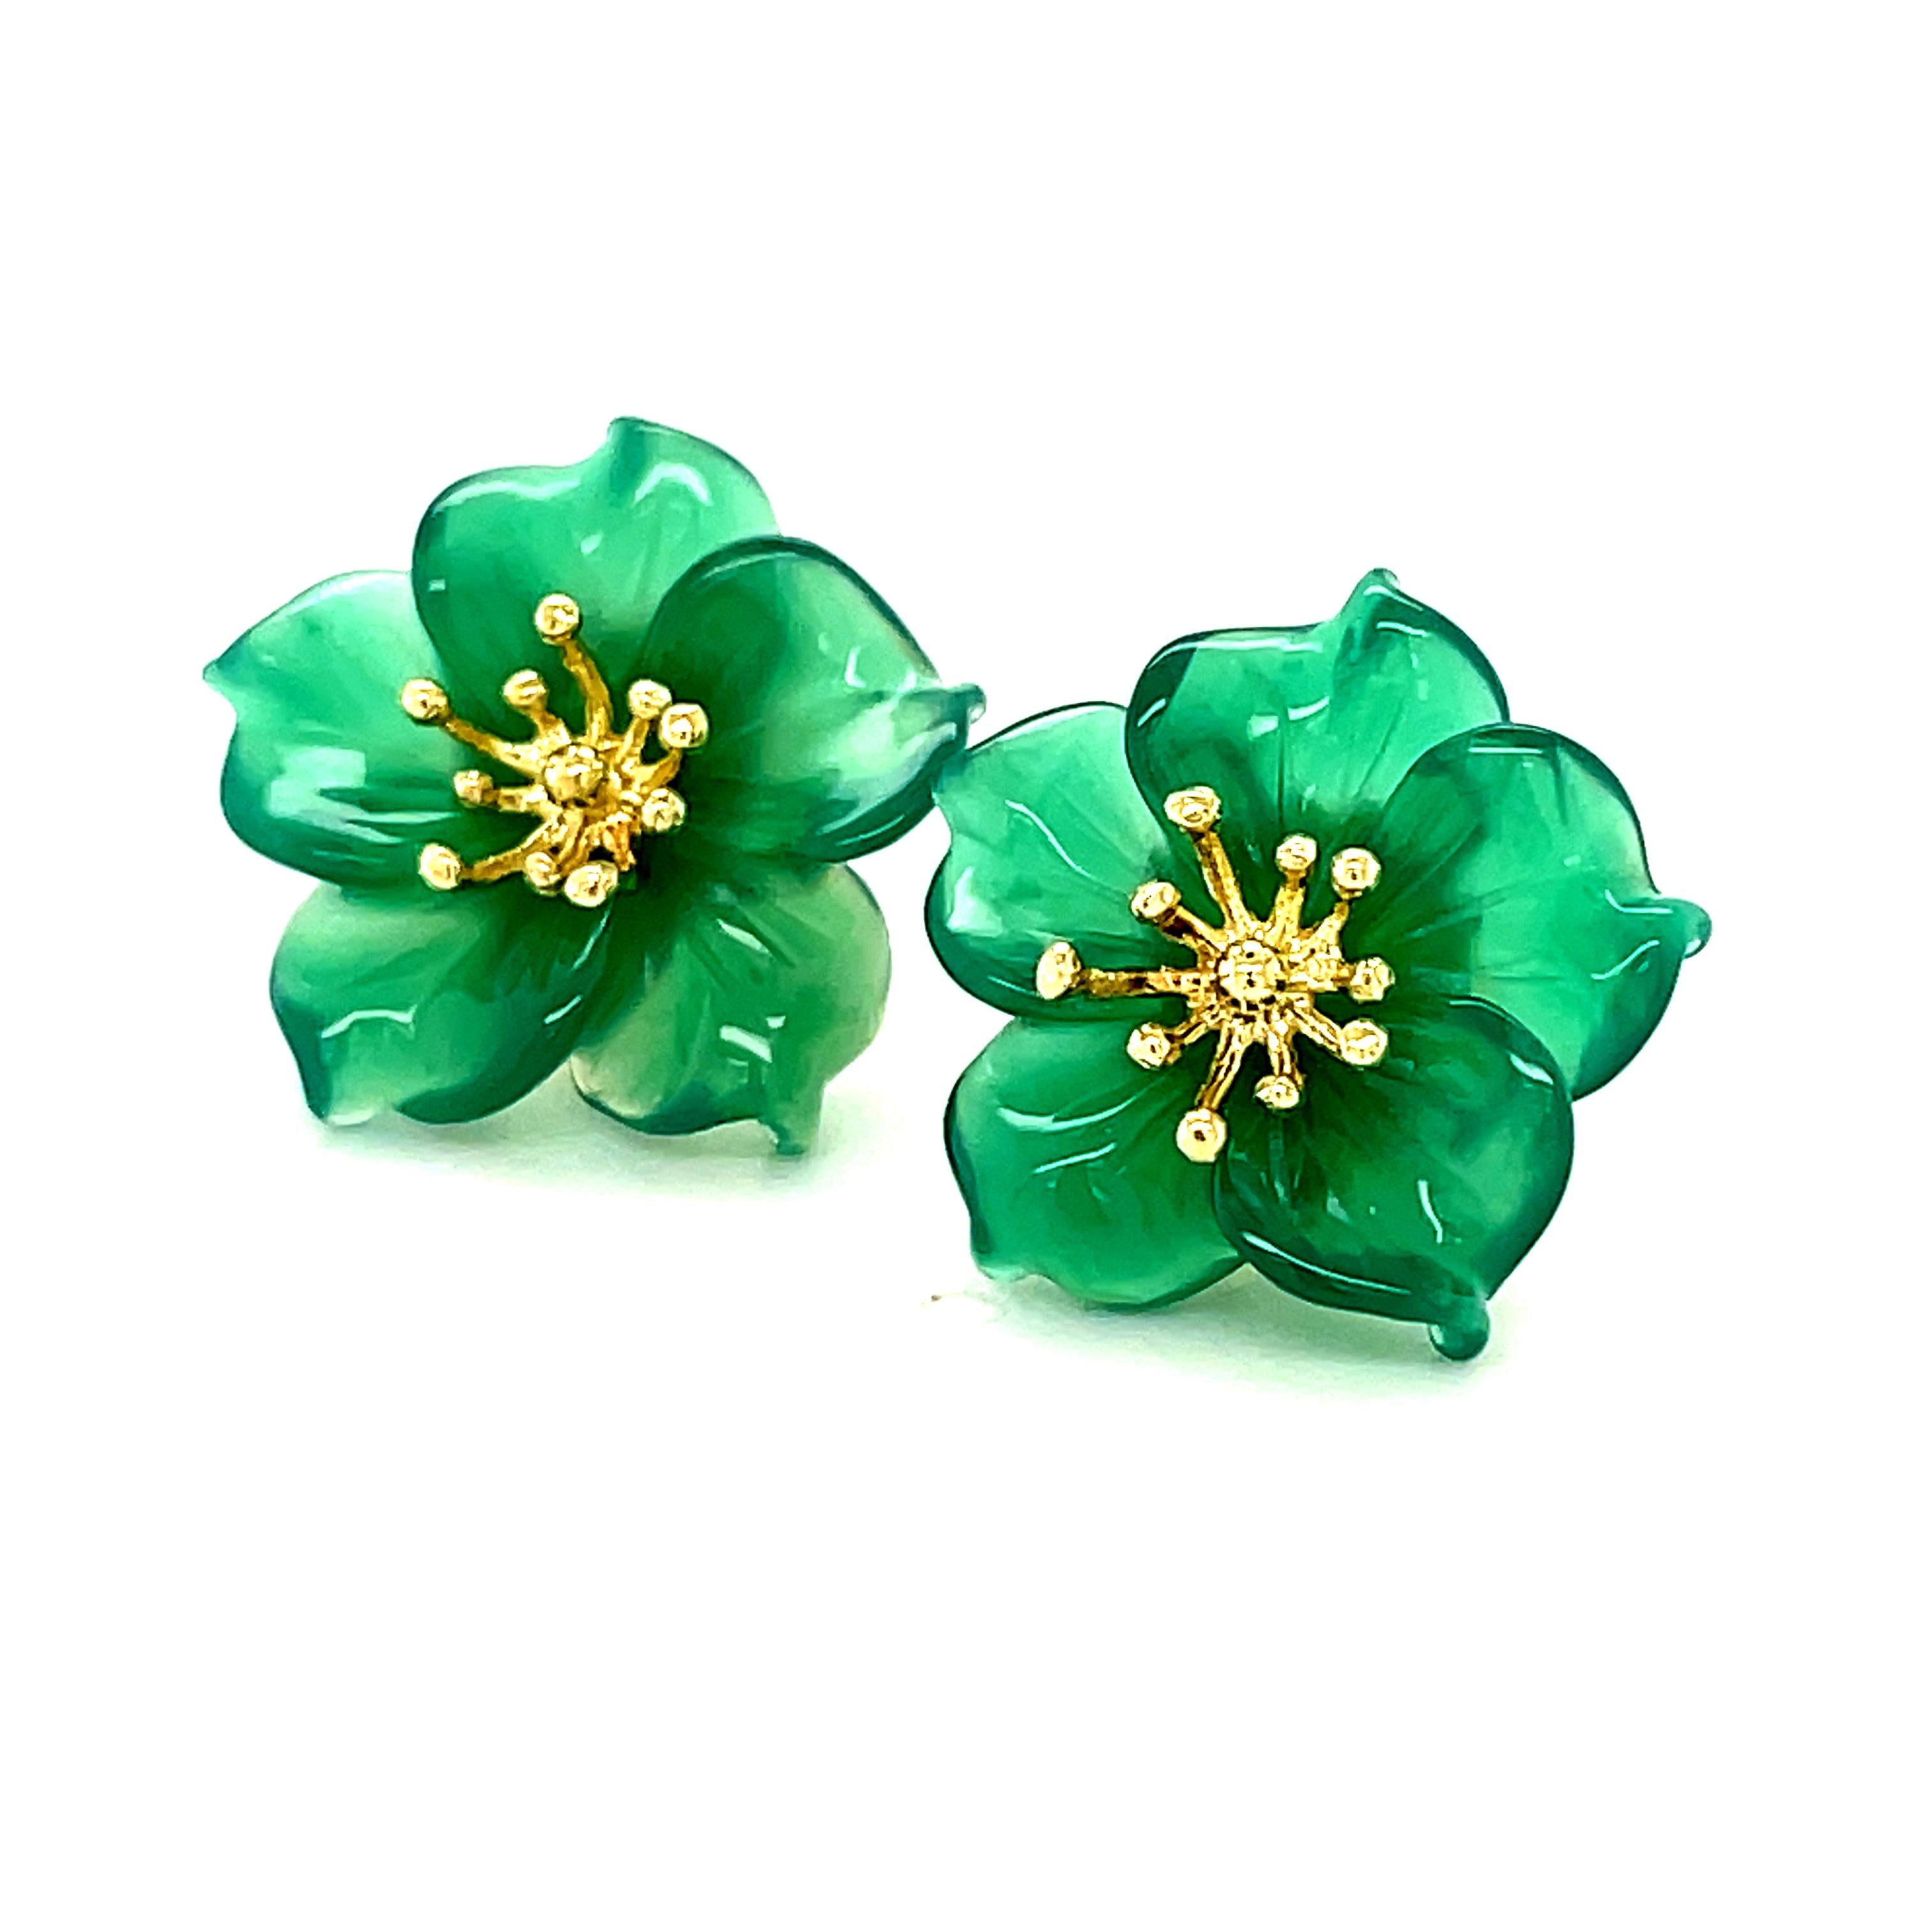 Mixed Cut Hand Carved Green Agate Flower Earring 18K Yellow Gold Stamen Posts